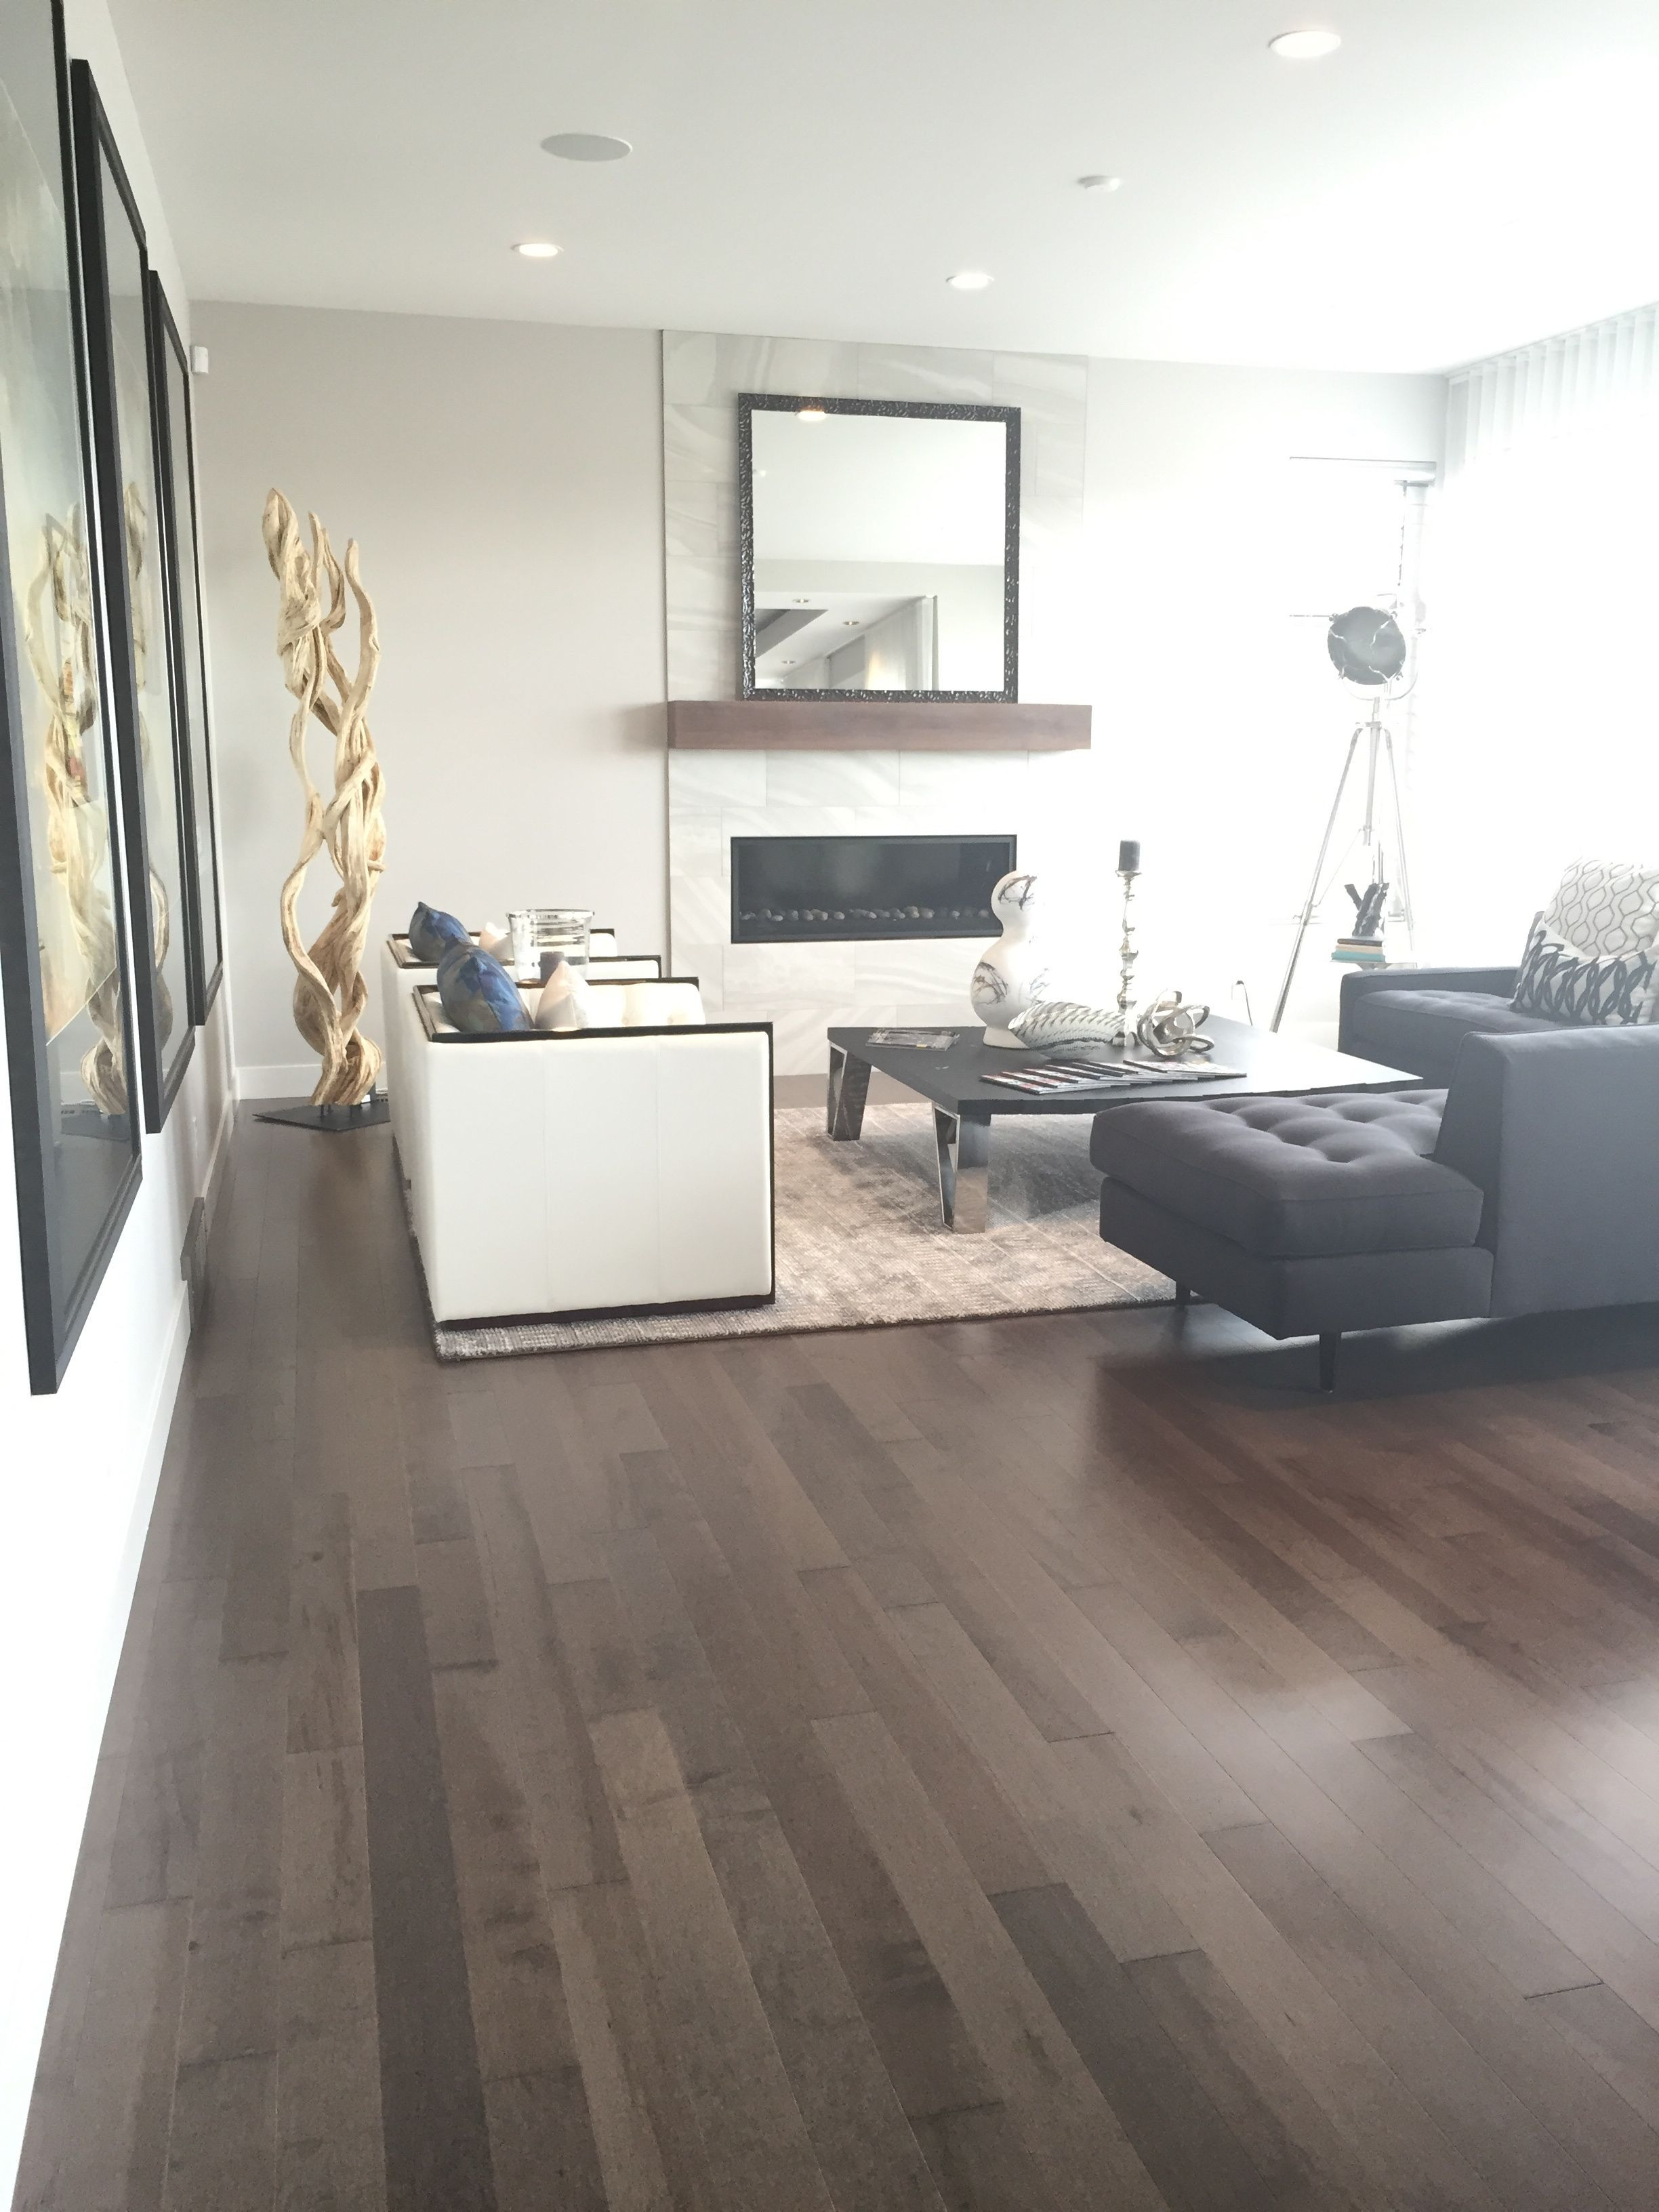 14 Stylish Denver Hardwood Floor Refinishing Cost 2023 free download denver hardwood floor refinishing cost of smoky grey essential hard maple tradition lauzon hardwood for beautiful living room from the cantata showhome featuring lauzons smokey grey hard map